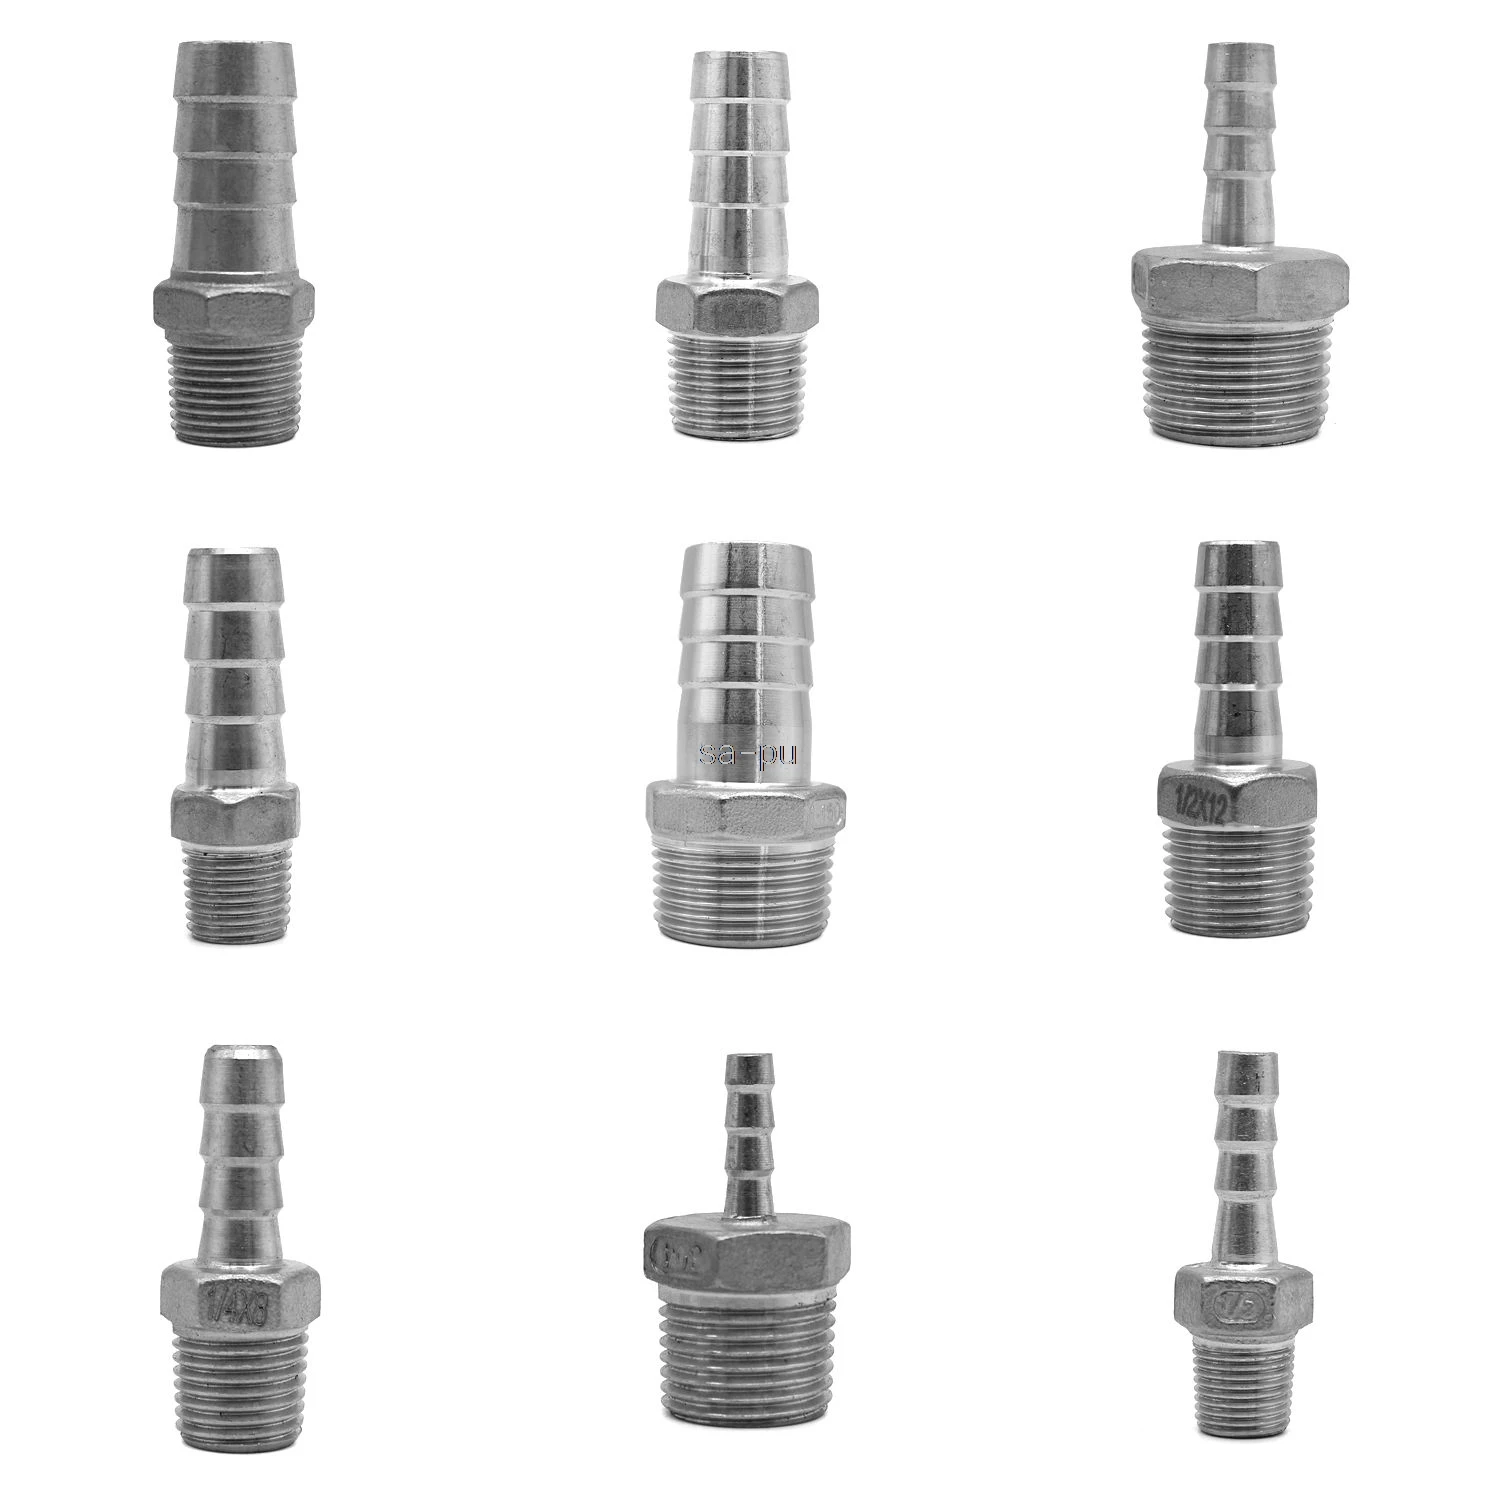 

304 Stainless Steel 1/8" 1/4" 3/8" 1/2" 3/4" 2" BSP Male Thread Pipe Fitting x 6mm-50mm Barb Hose Tail Pagoda Coupling Connector